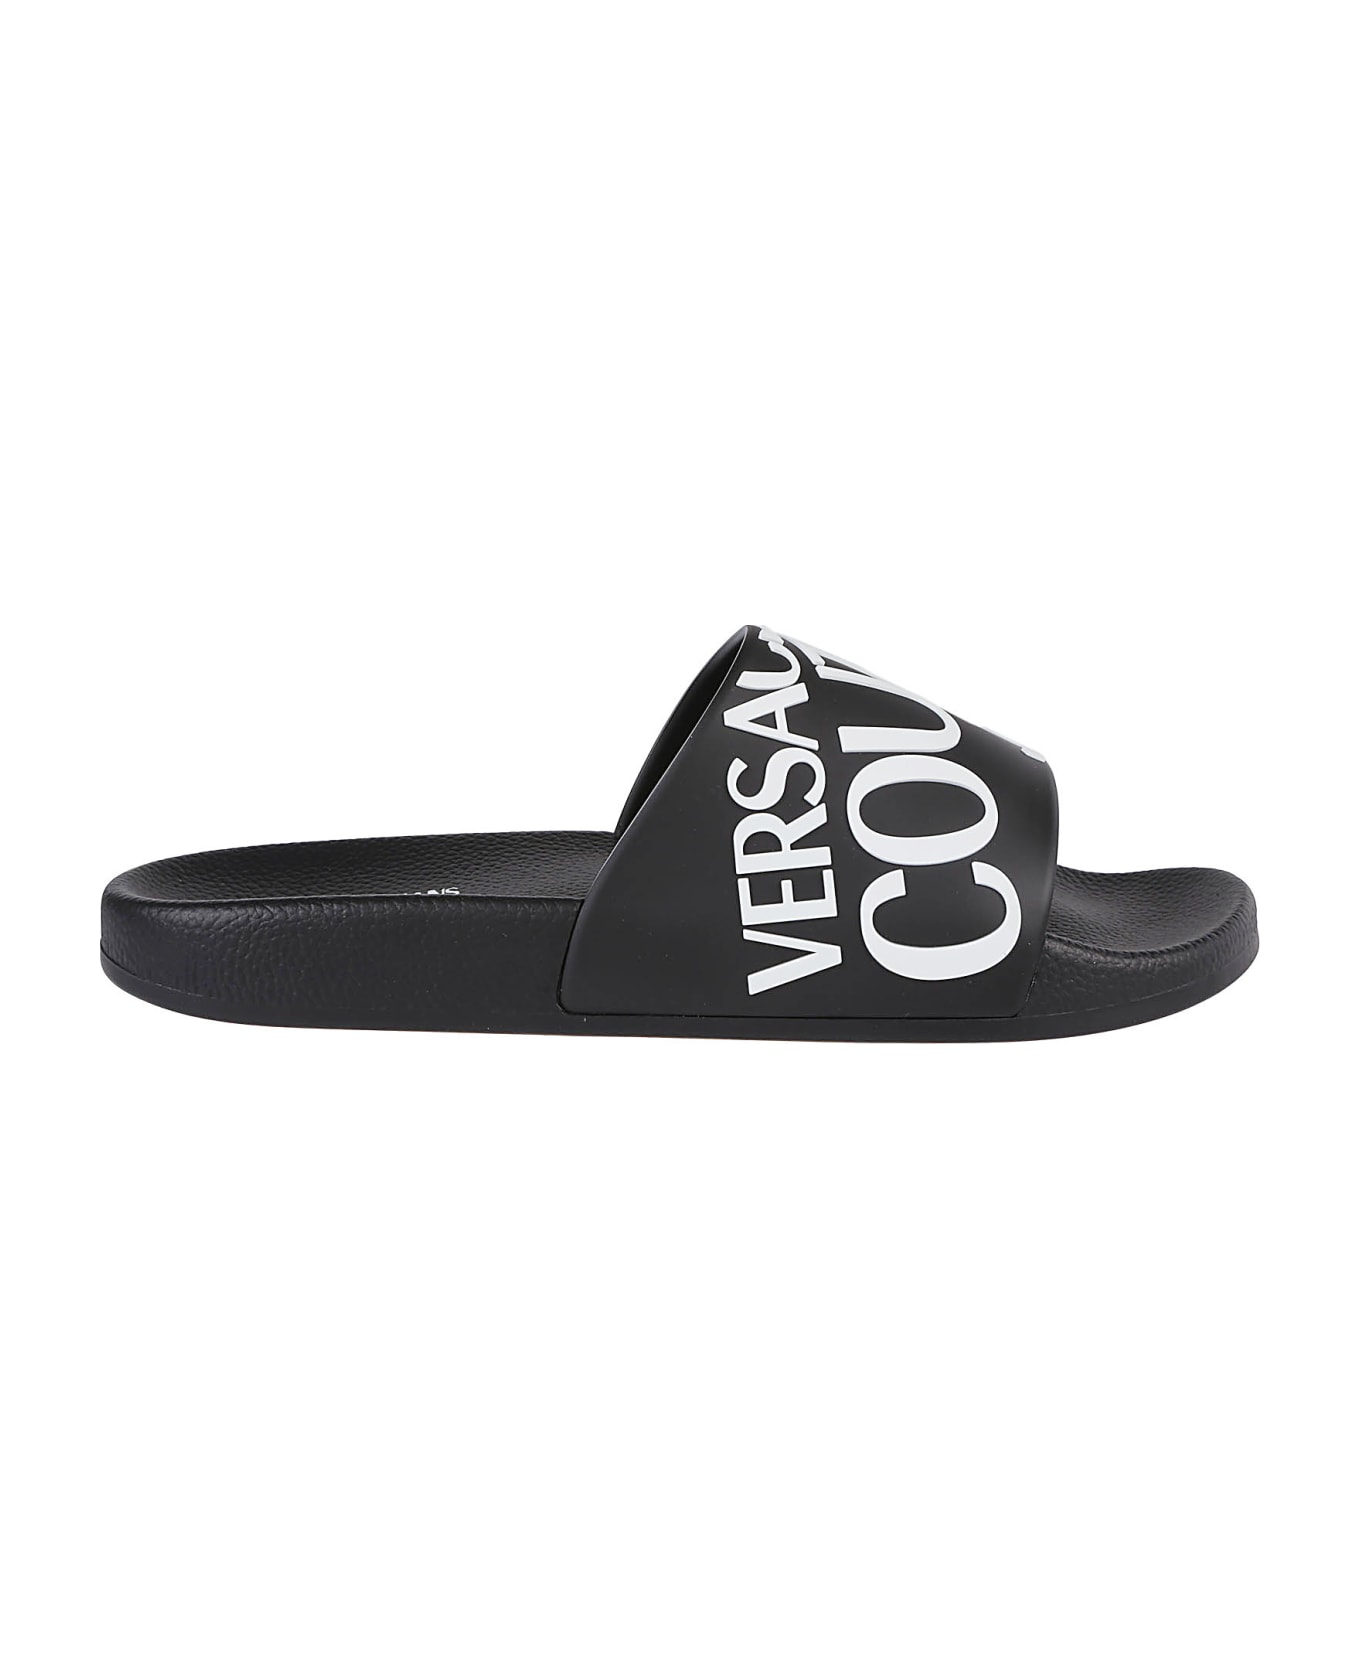 Versace Jeans Couture Gummy Sq1 Sliders - Black その他各種シューズ